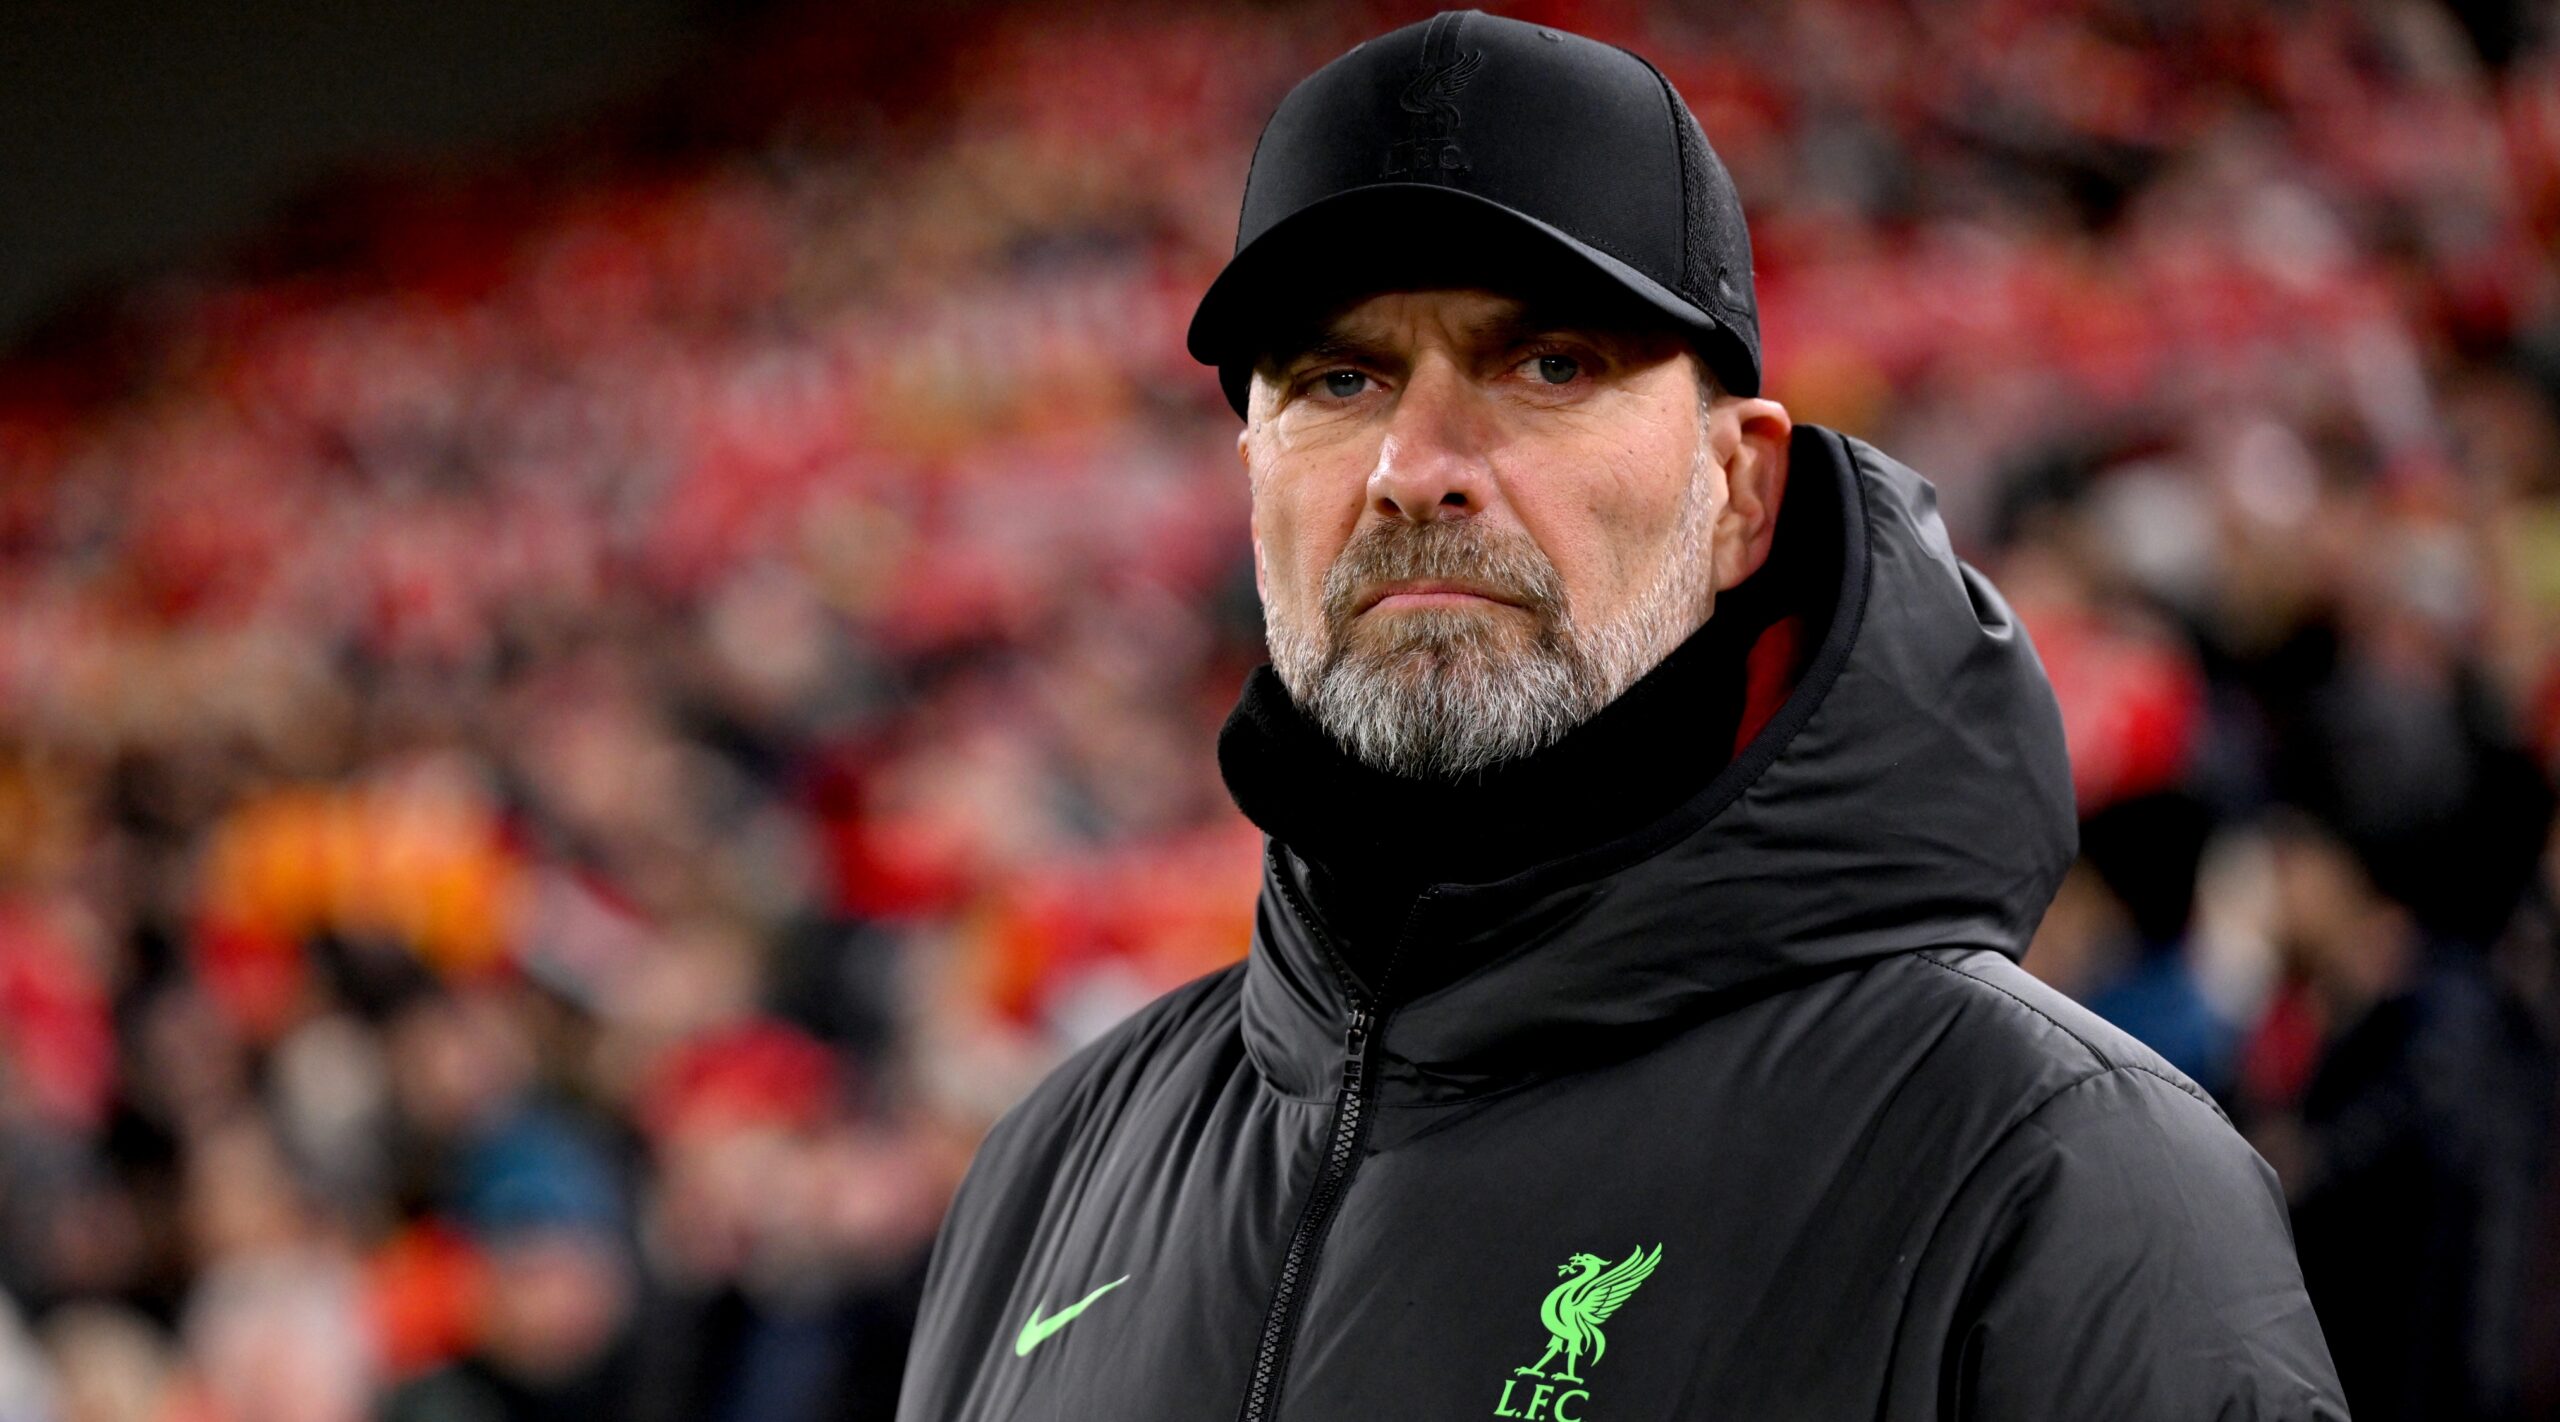 Liverpool 'expected' to make transfer swoop for Premier League midfield star